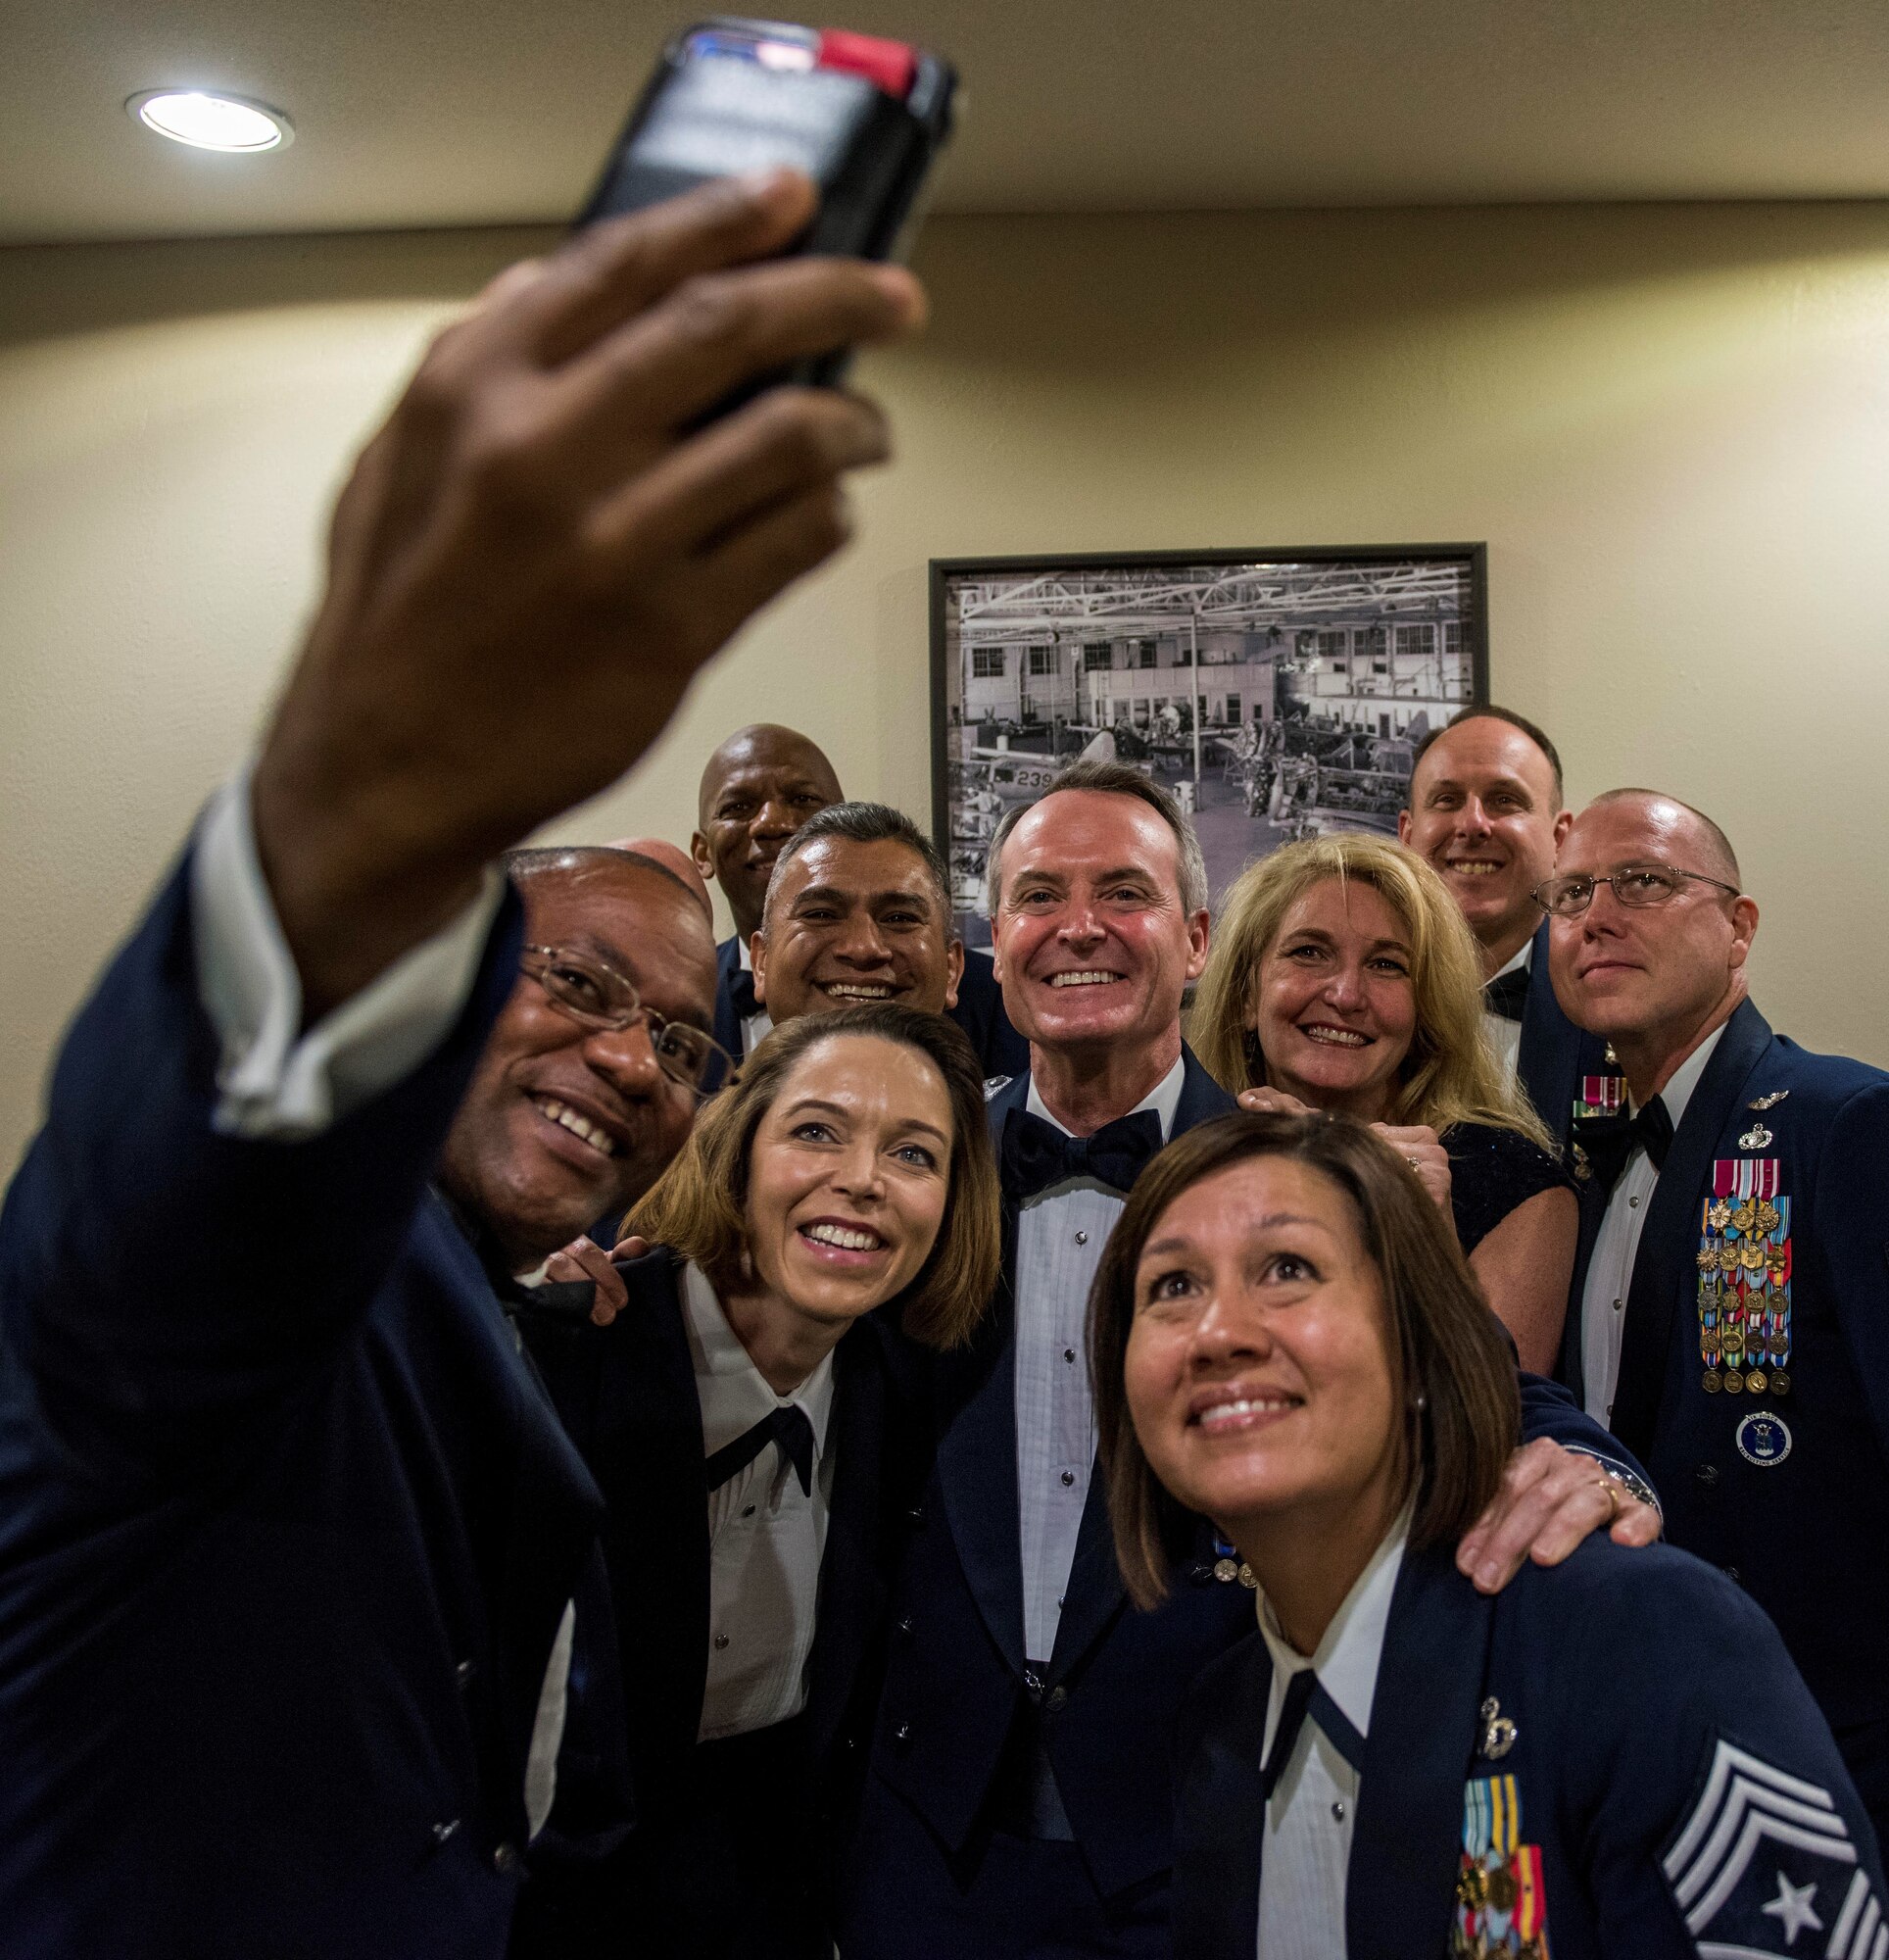 Retired Lt. Gen. Darryl Roberson poses in a group photo with Air Education and Training Command Chiefs Sept. 13, 2018 at Luke Air Force Base, Ariz.